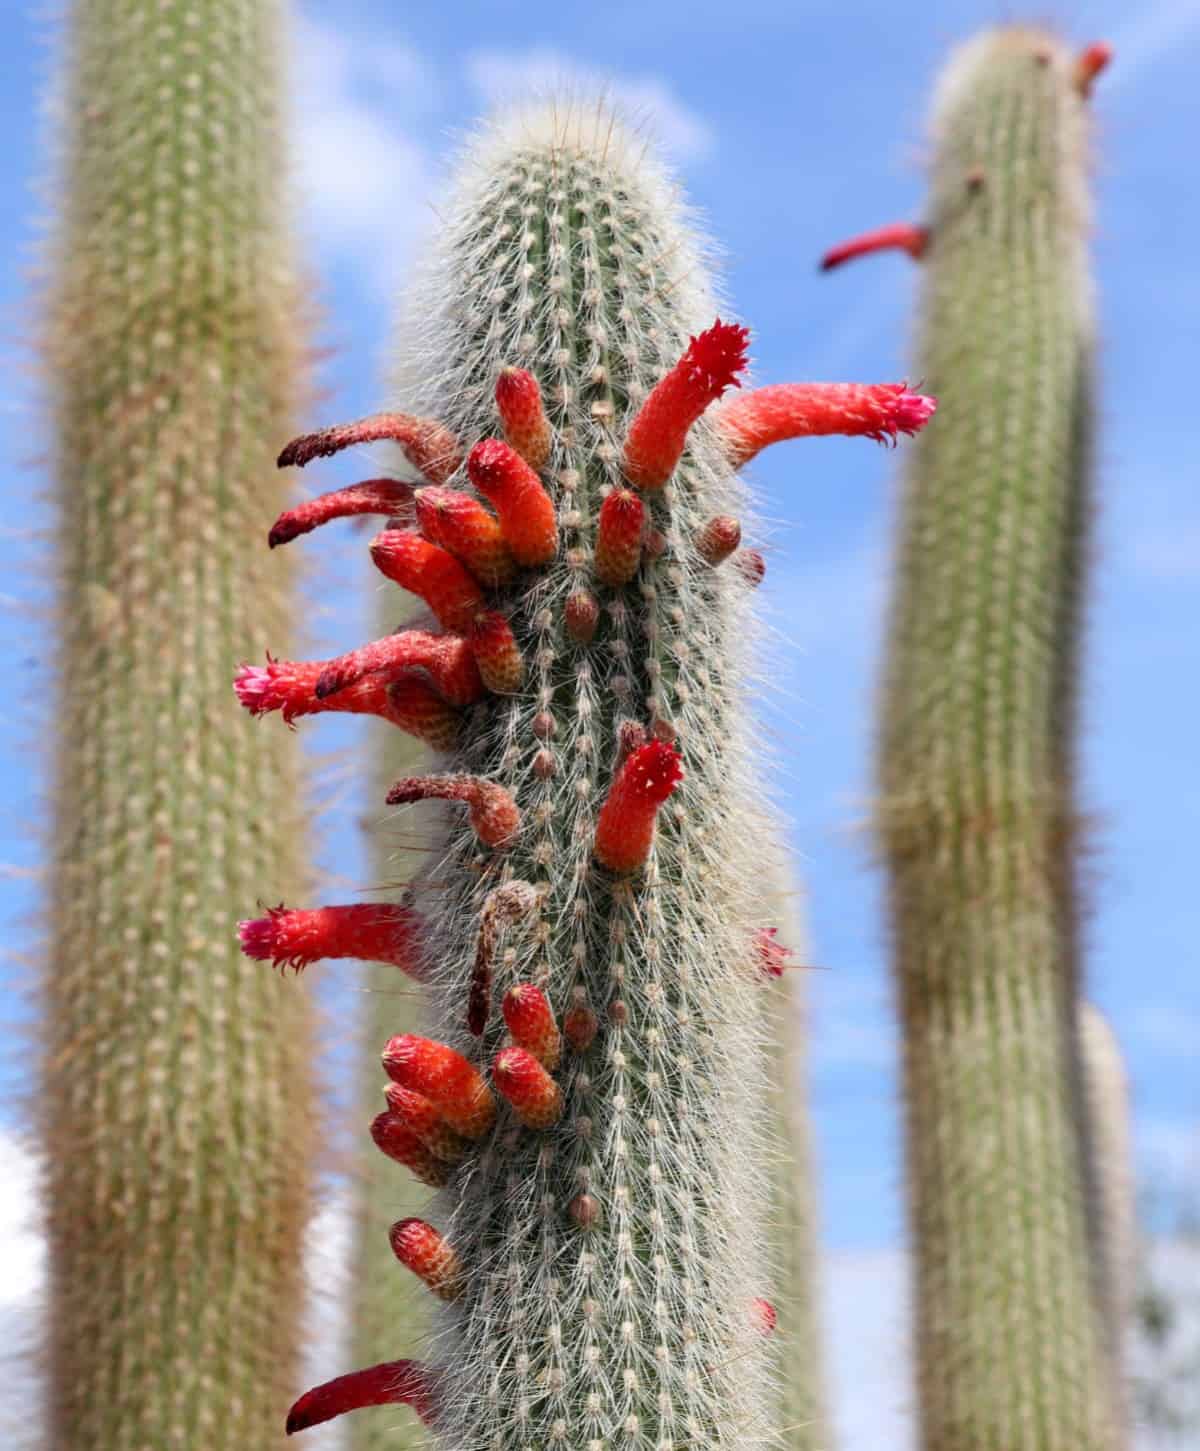 The silver torch cactus has an unusual branching habit.